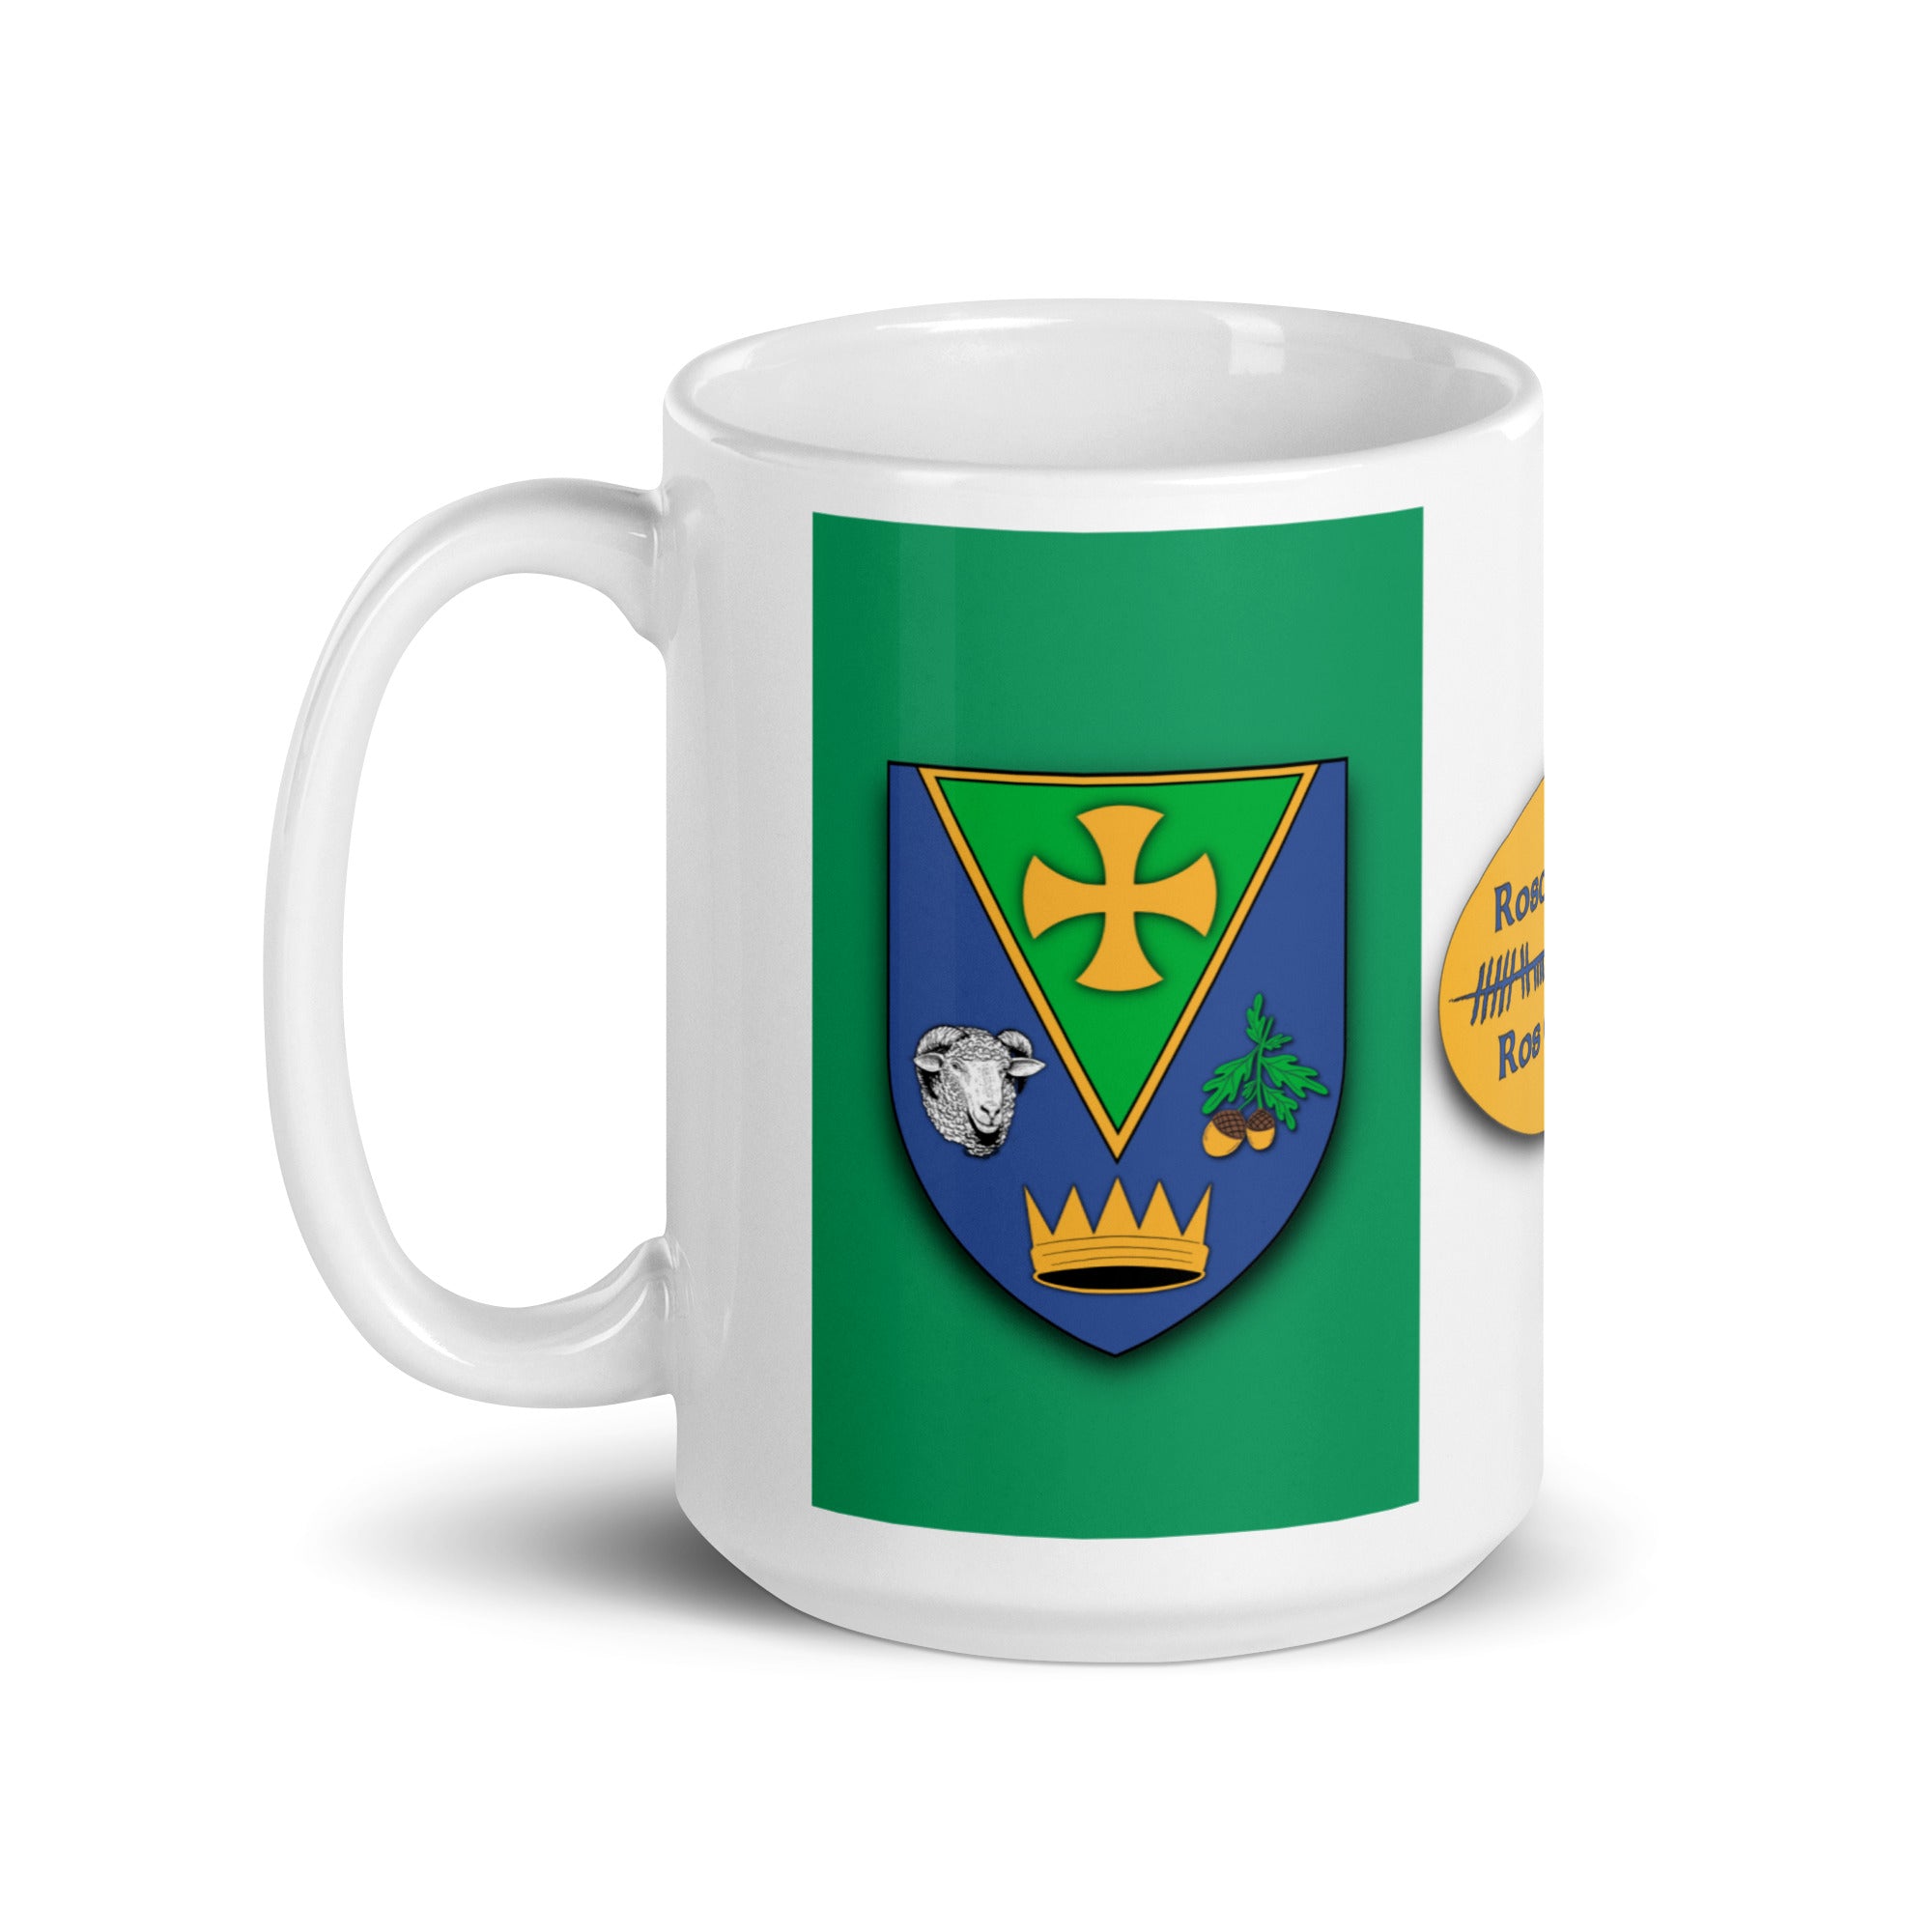 County Roscommon Ireland Coffee Tea Mug With Roscommon Coat of Arms and Ogham